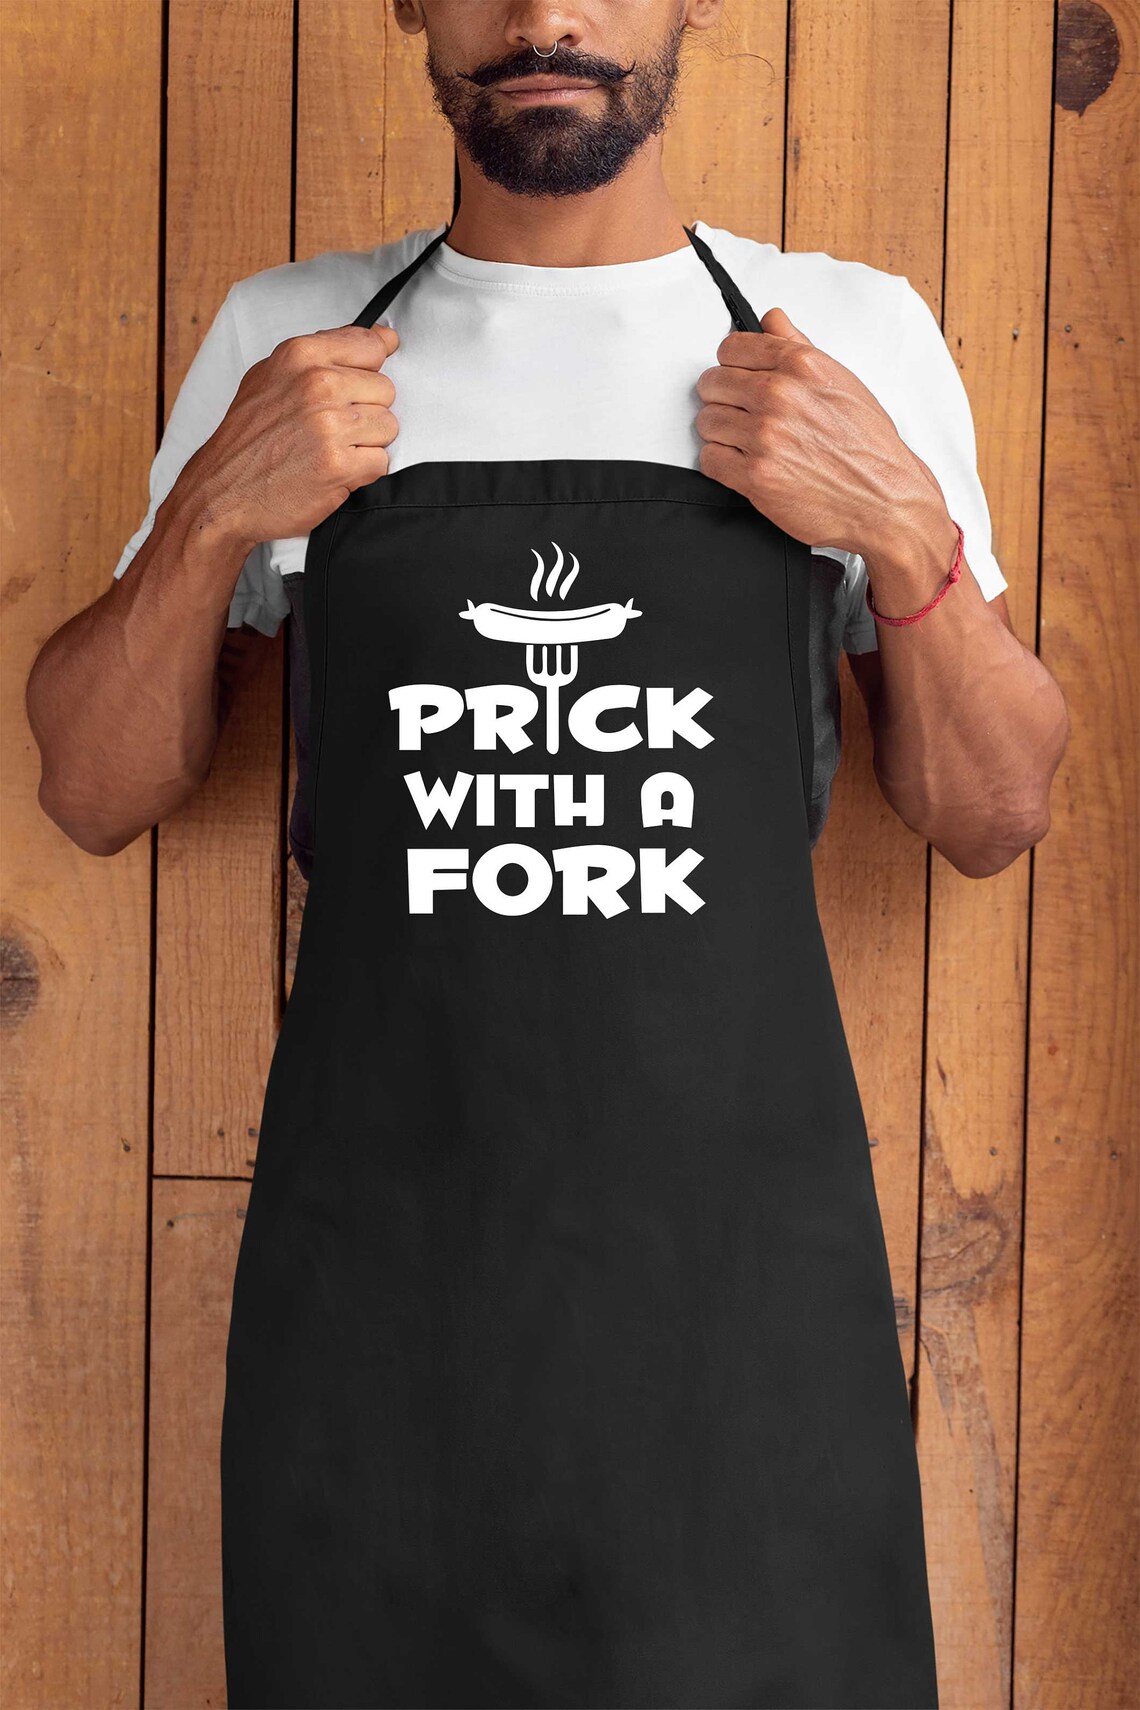 Funny BBQ Apron Novelty Aprons Cooking Gifts for Men PRICK | Etsy